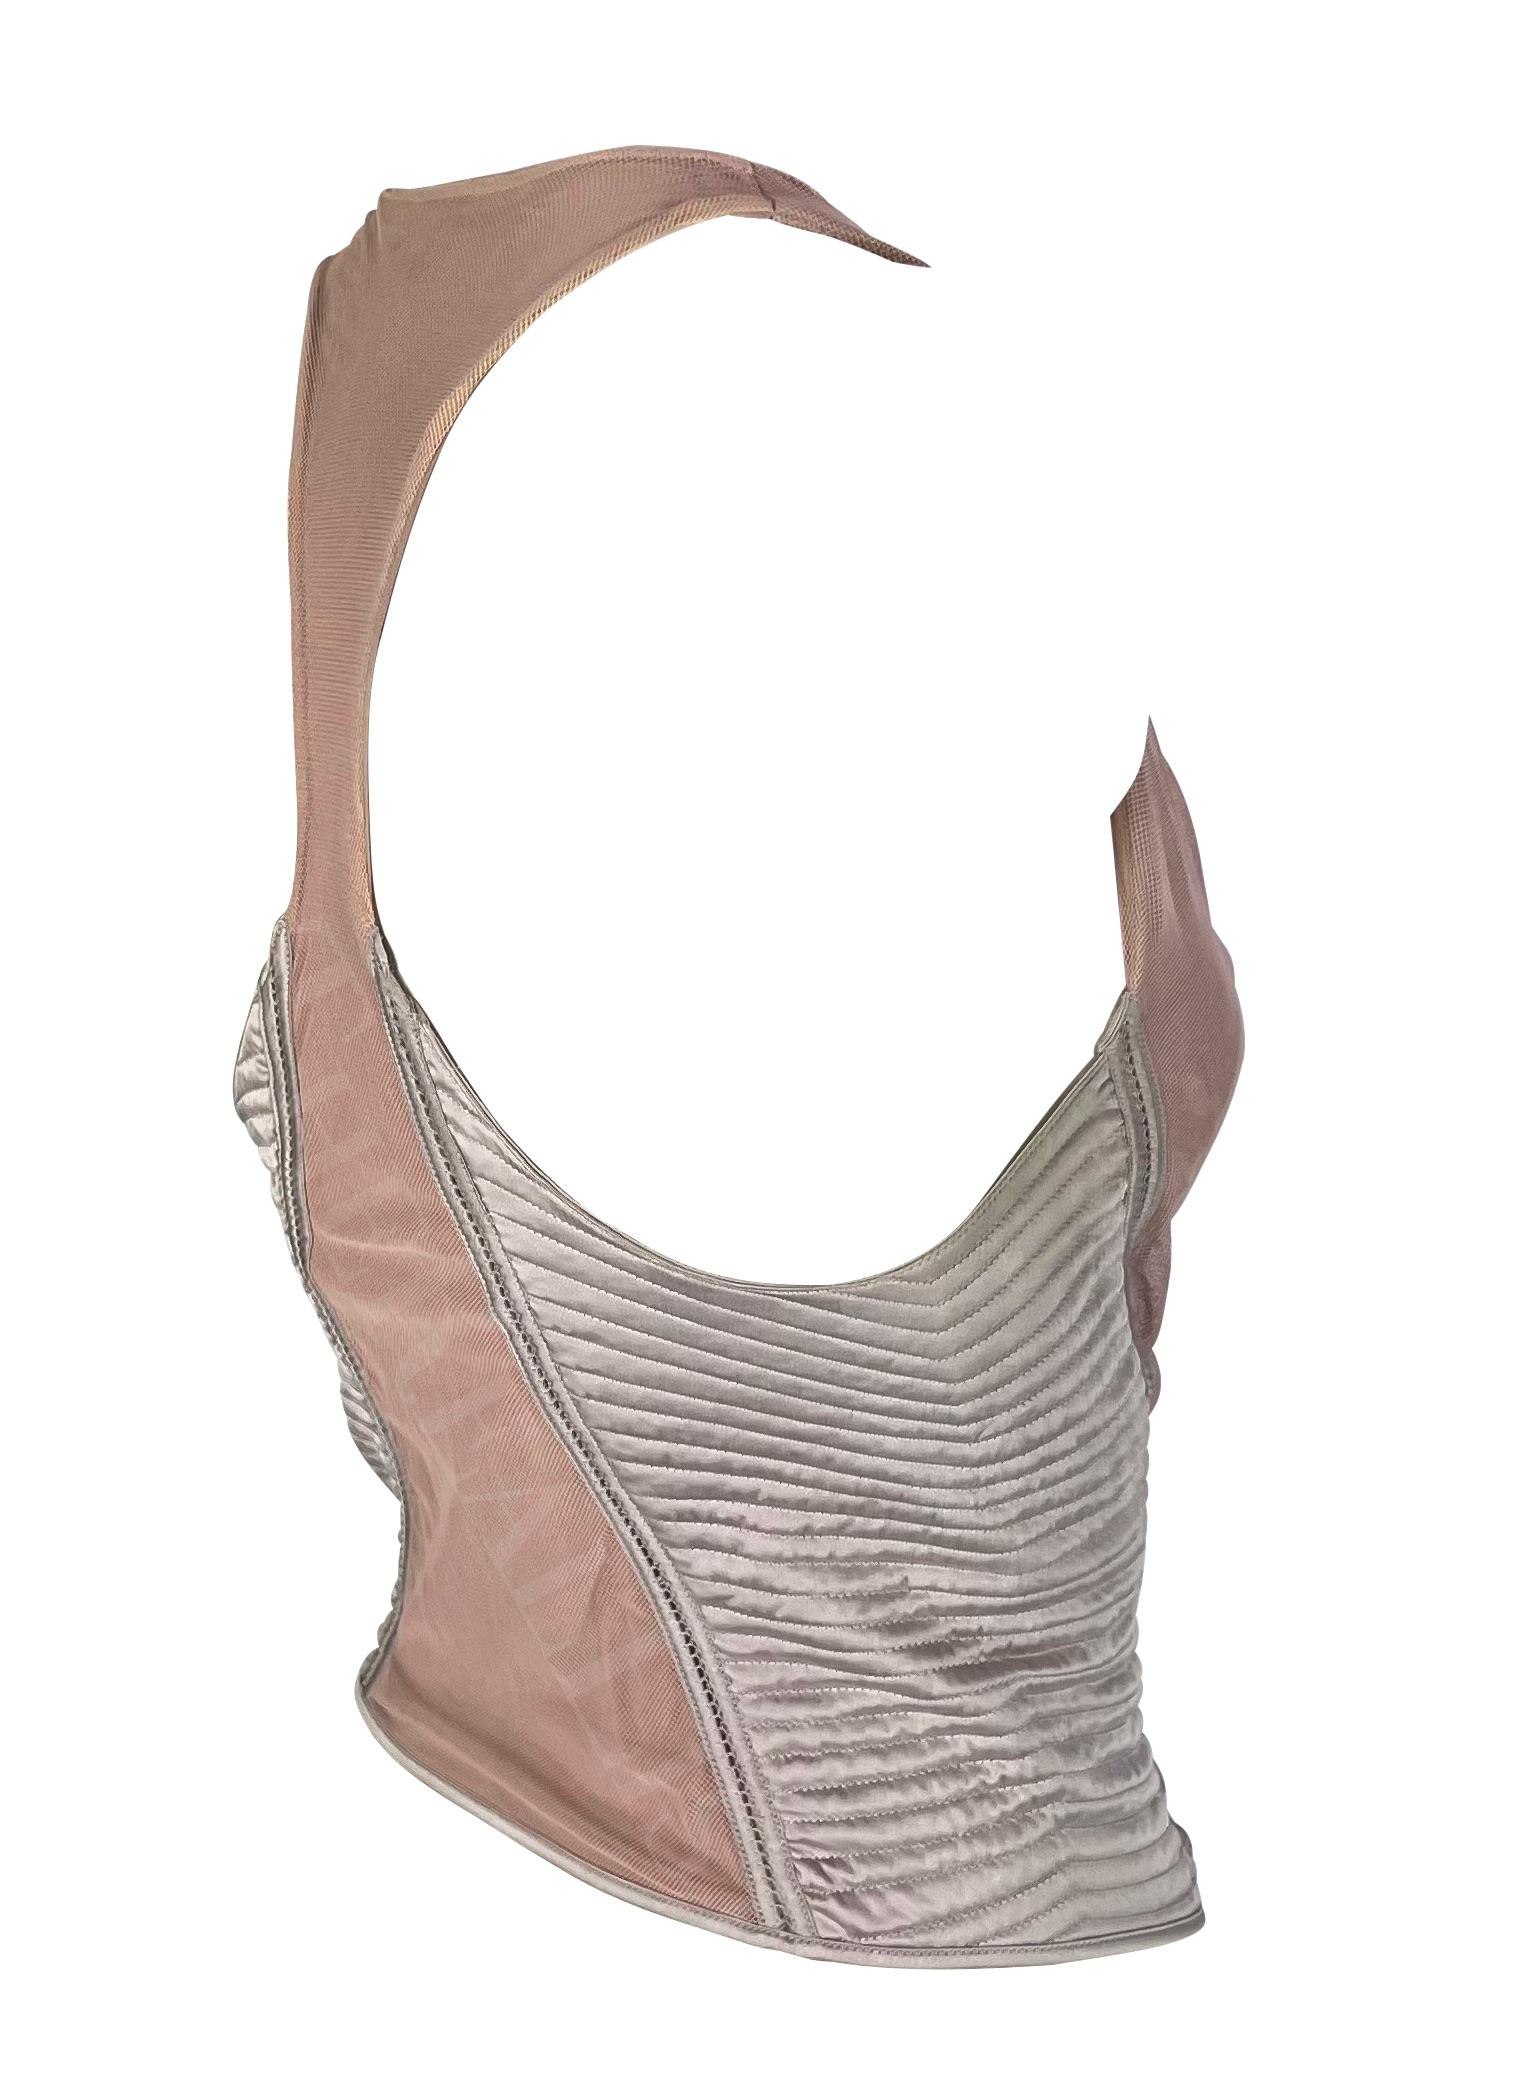 F/W 2003 Gucci by Tom Ford Pink Mesh Quilted Satin Stretch Racerback Tank Top In Good Condition For Sale In West Hollywood, CA